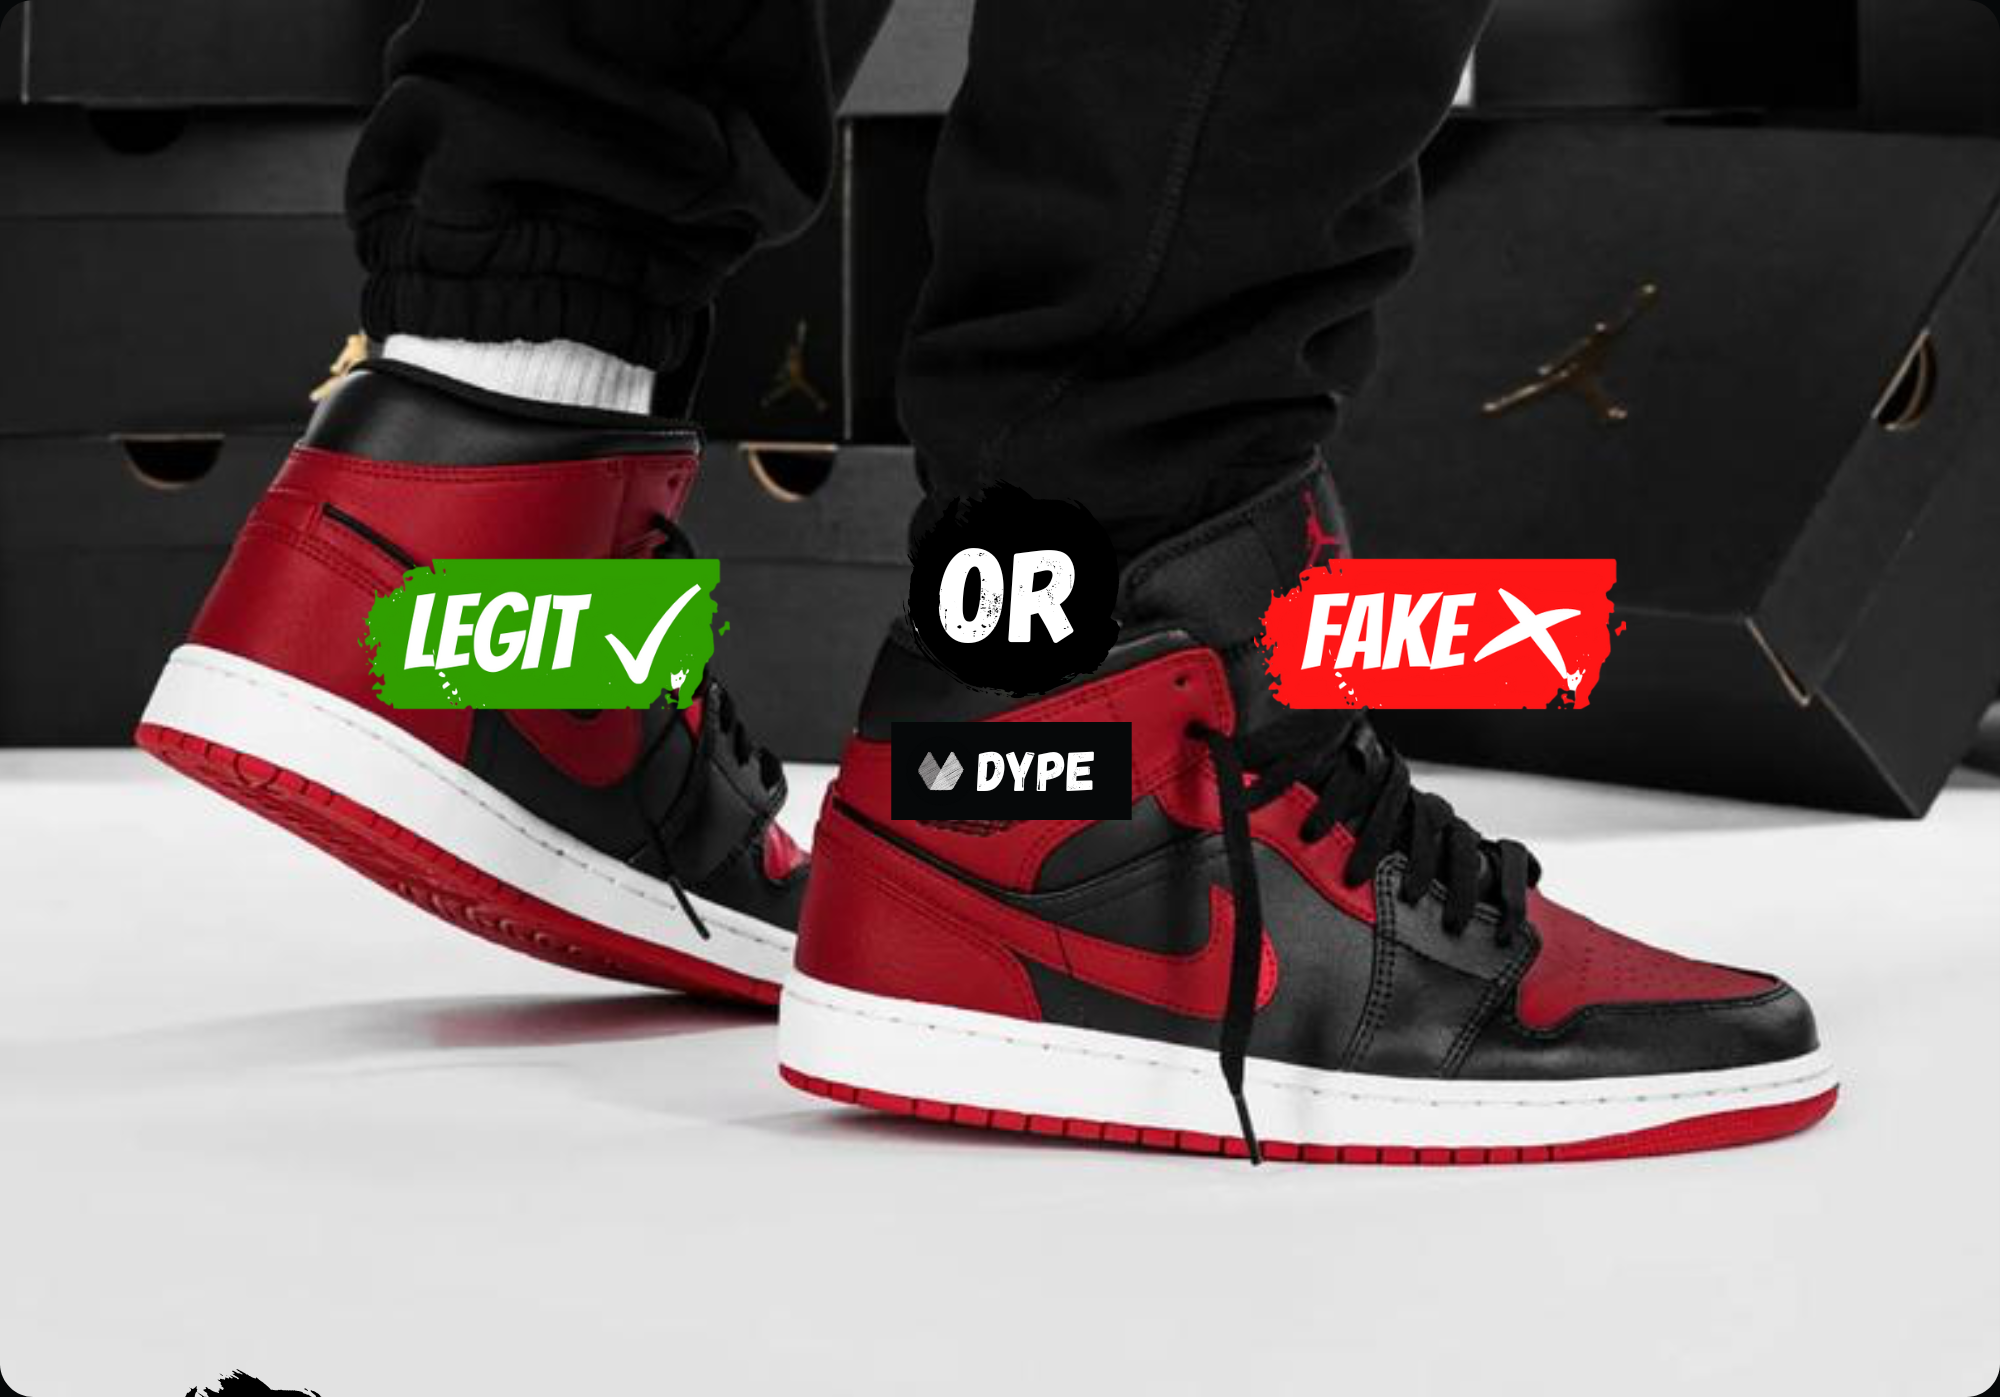 how to know if air jordan 1 is original